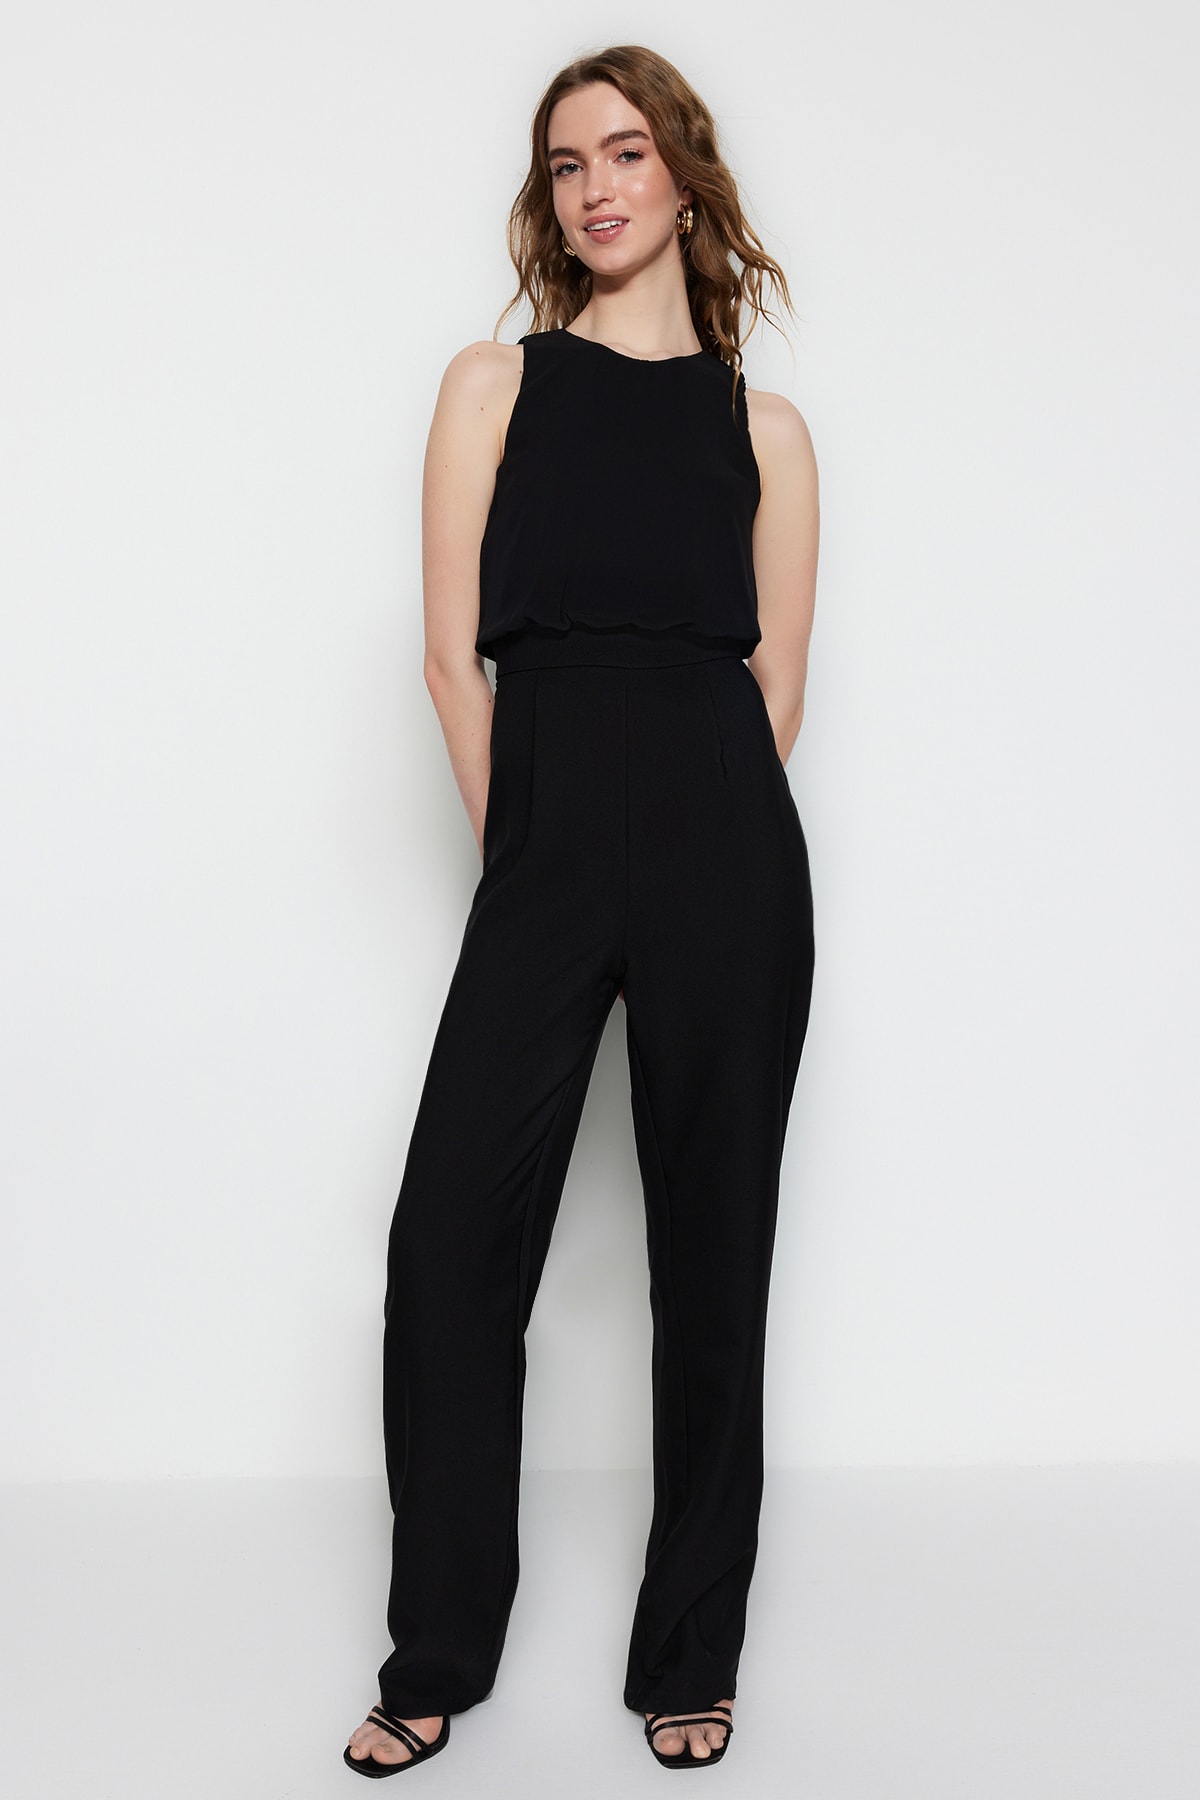 Trendyol Black Maxi Woven Top Lined Jumpsuit